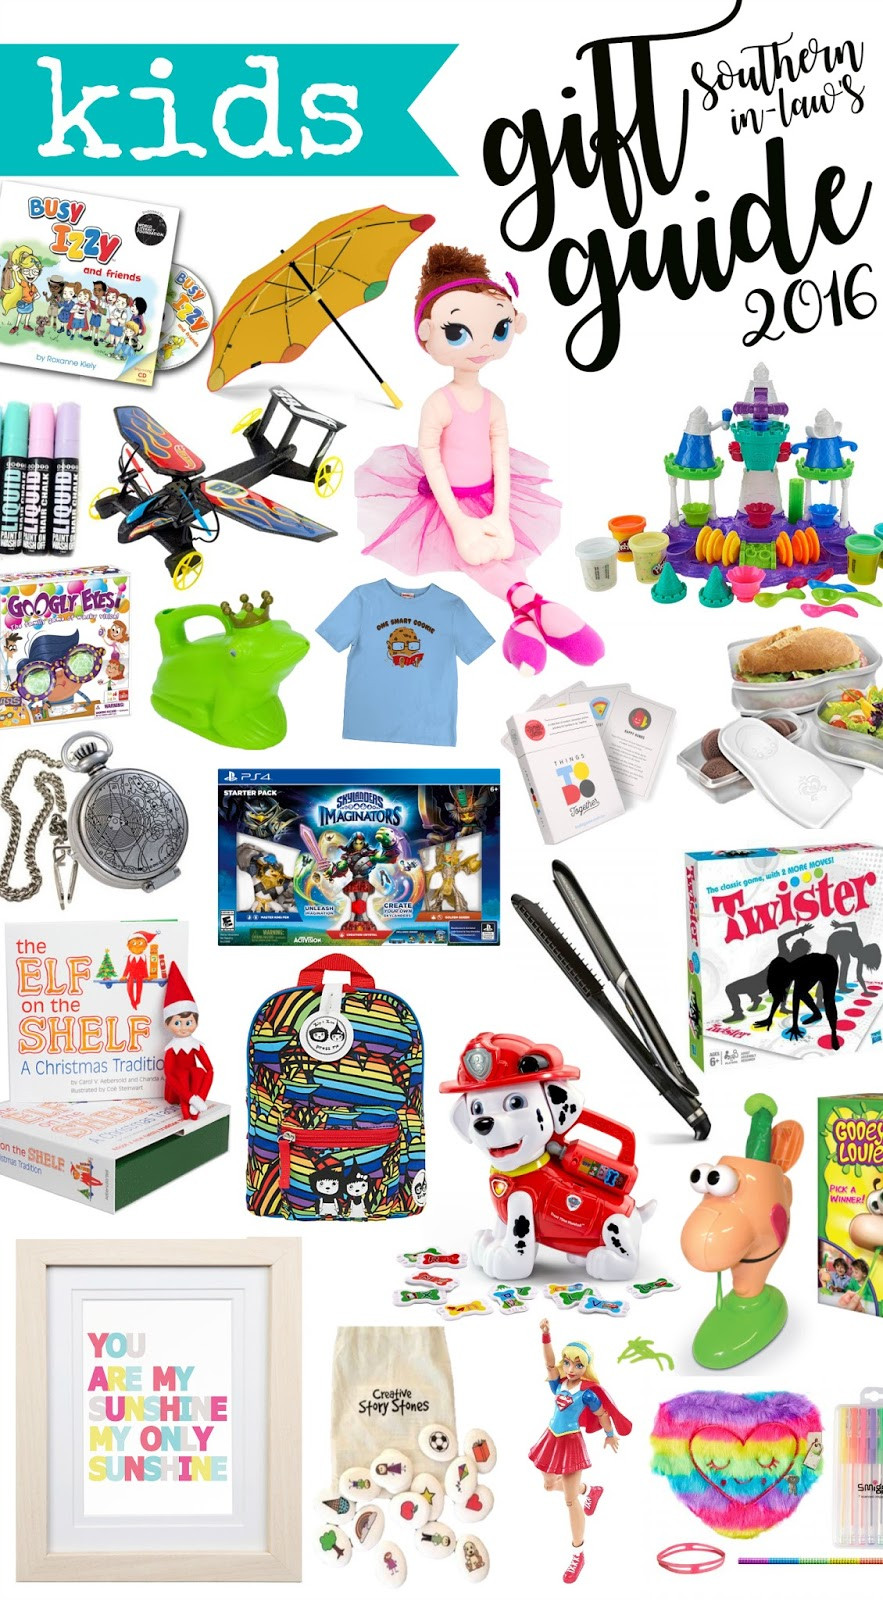 Christmas Gift Ideas For Children
 Southern In Law 2016 Kids Christmas Gift Guide